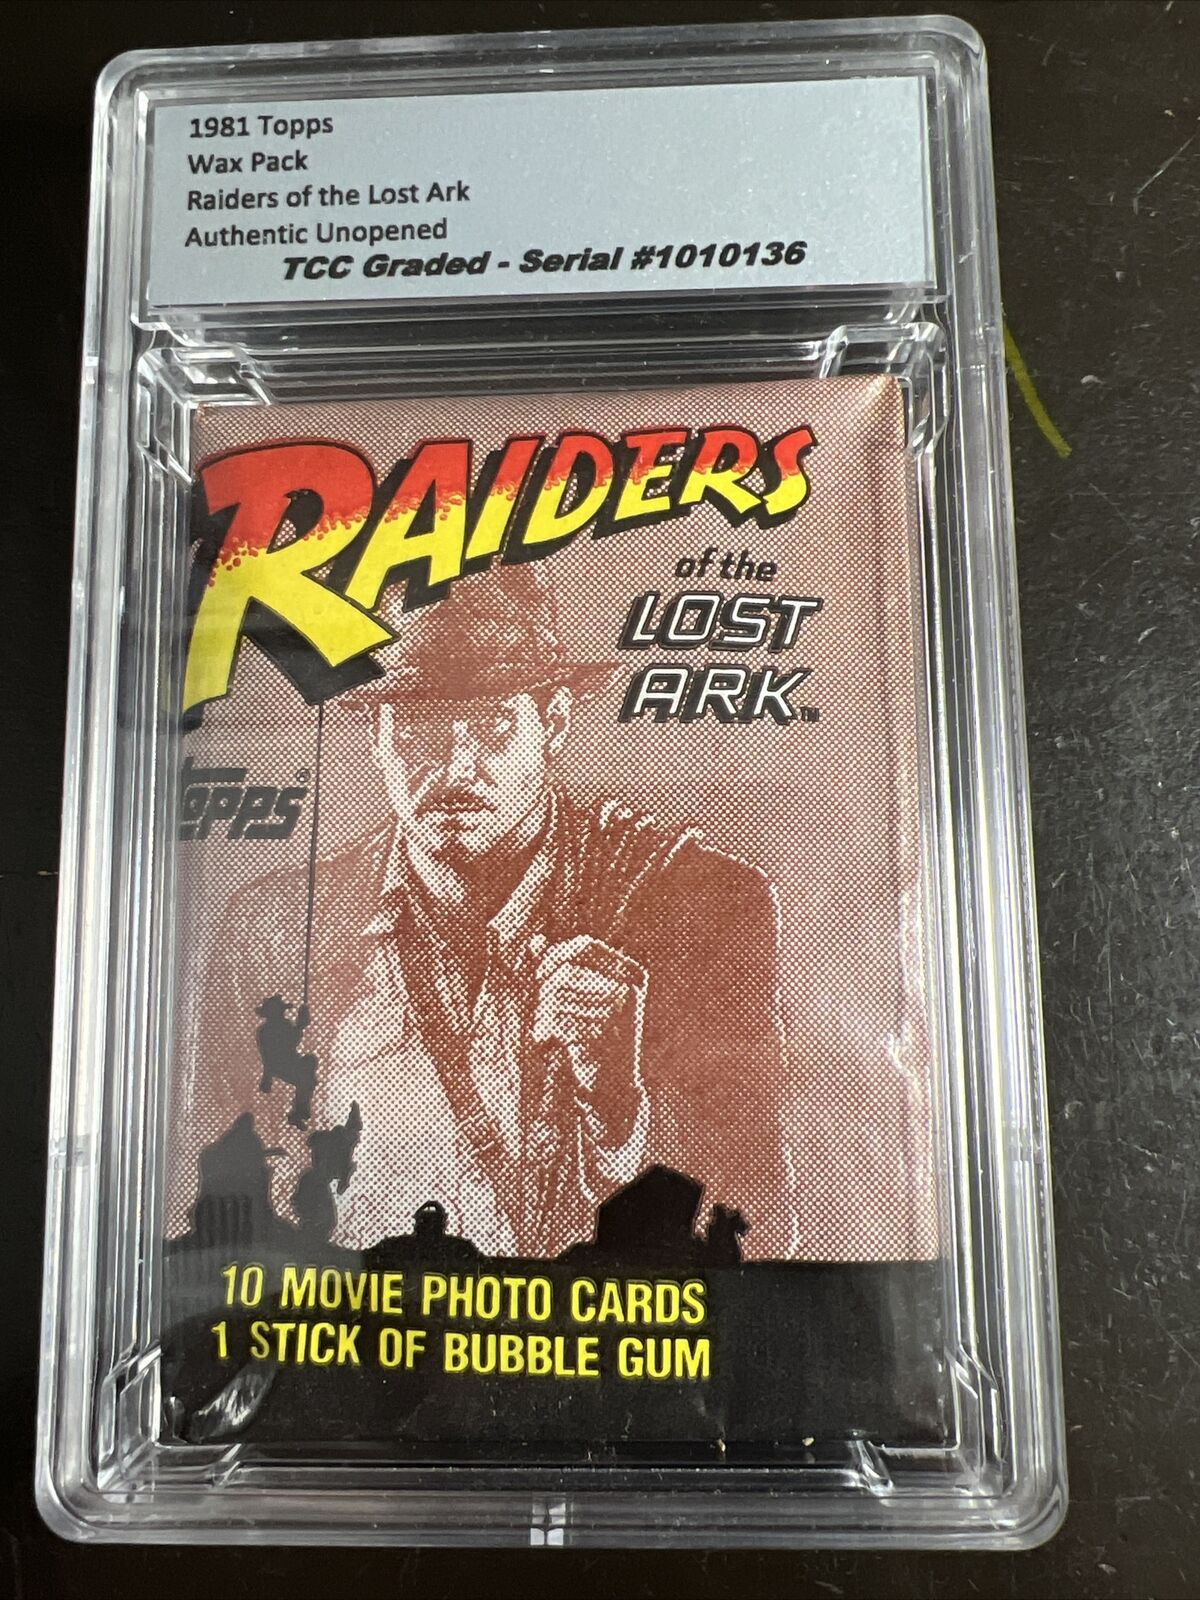 1981 Topps Raiders Of The Lost Ark Wax Pack Authentic Unopened Encapsulated